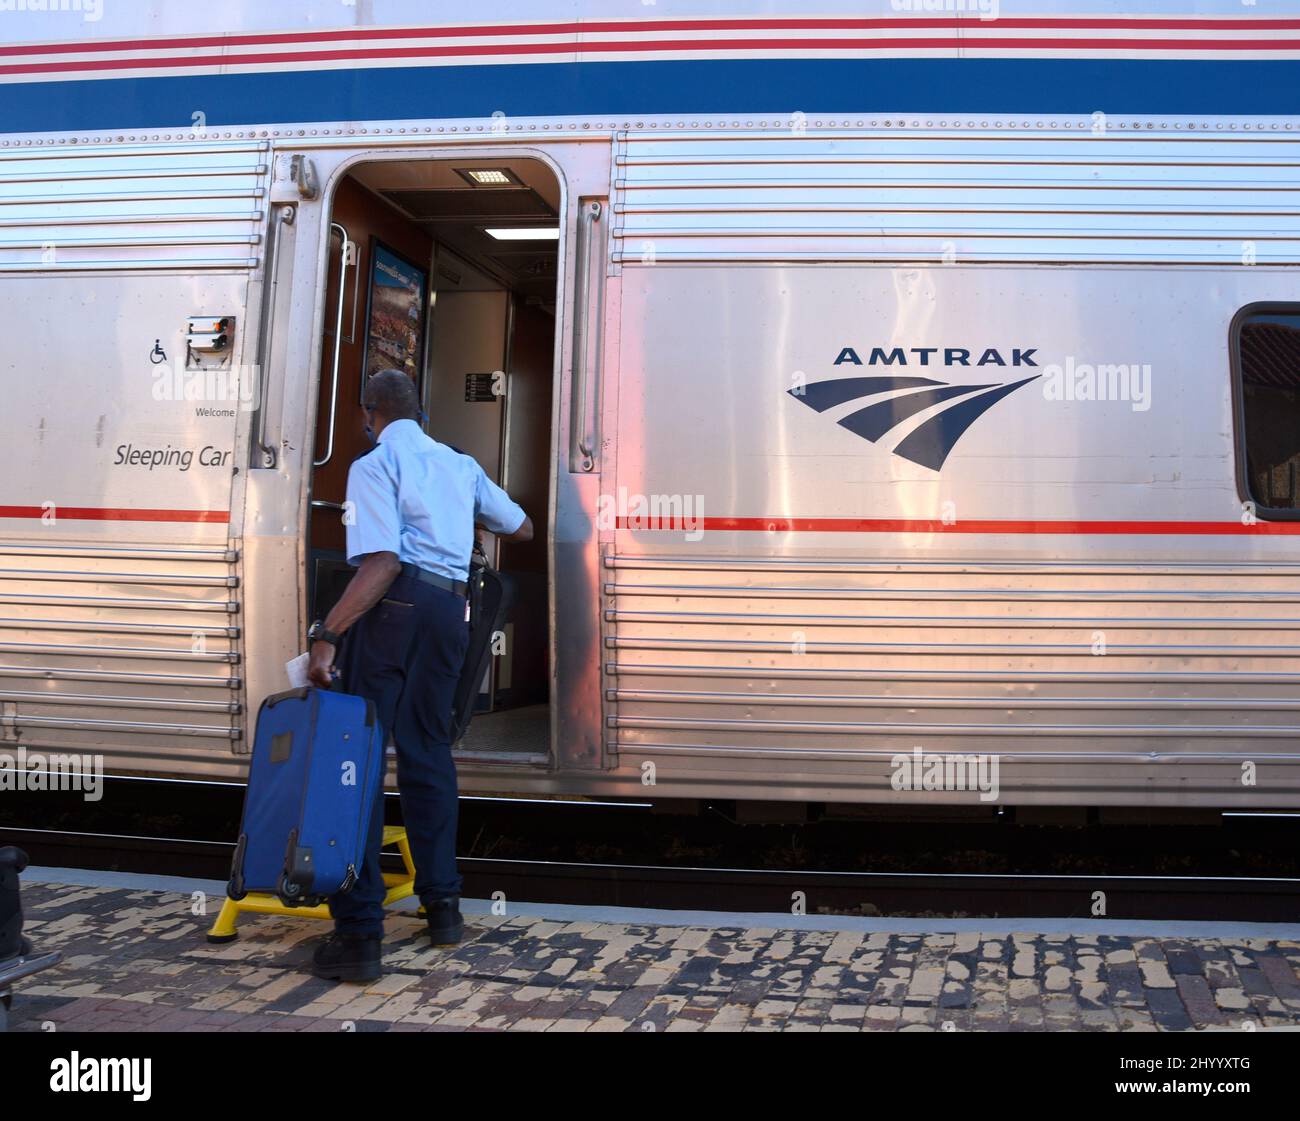 An Amtrak employee loads suitcases on an Amtrak passenger train stopped in Lamy, New Mexico, to pick up passengers. Stock Photo